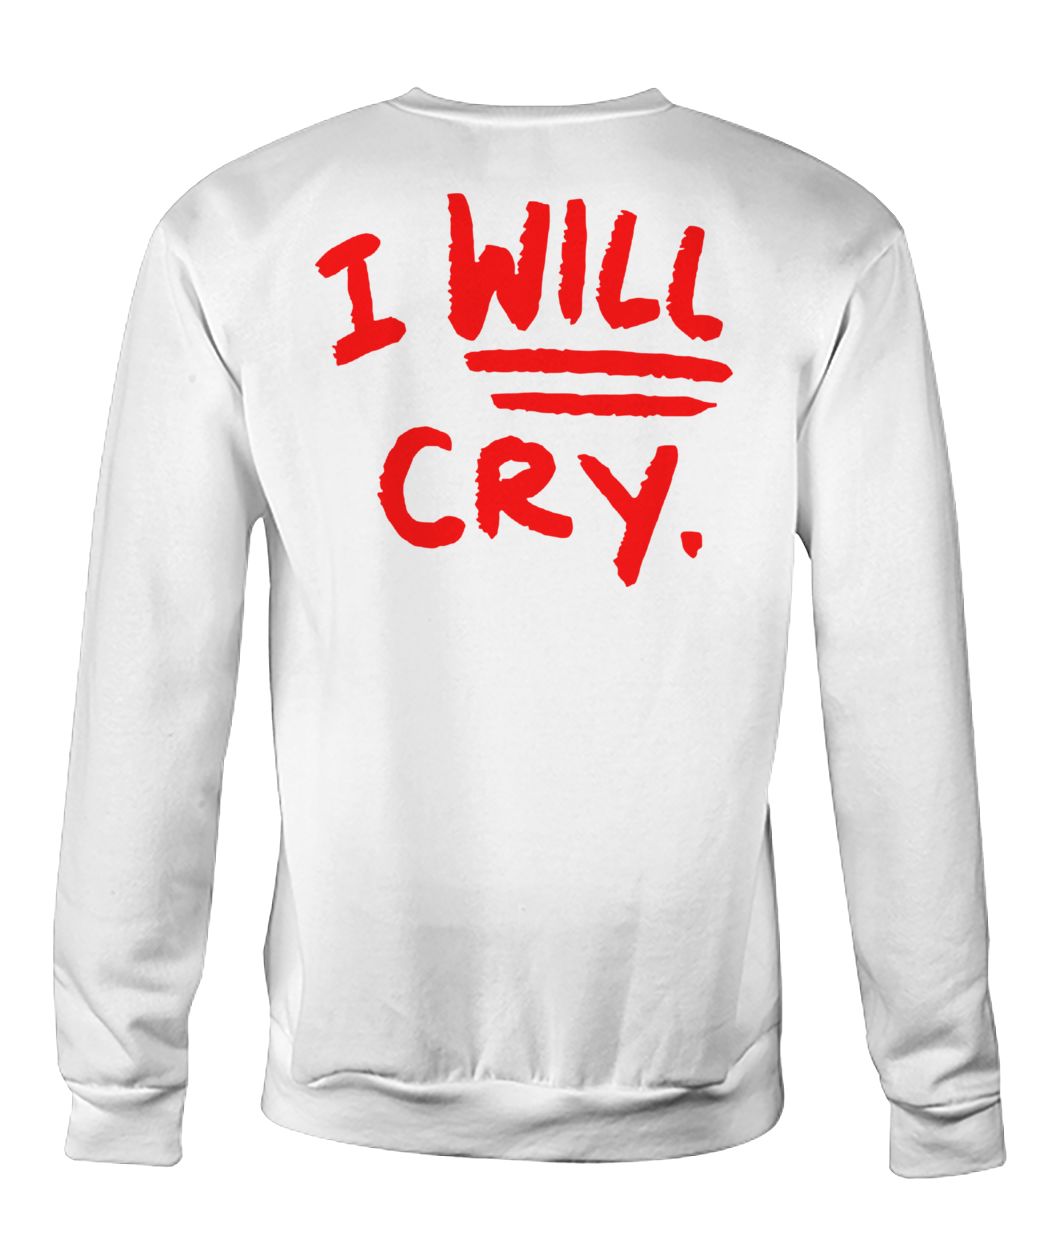 Don't fuck with me I will cry crew neck sweatshirt